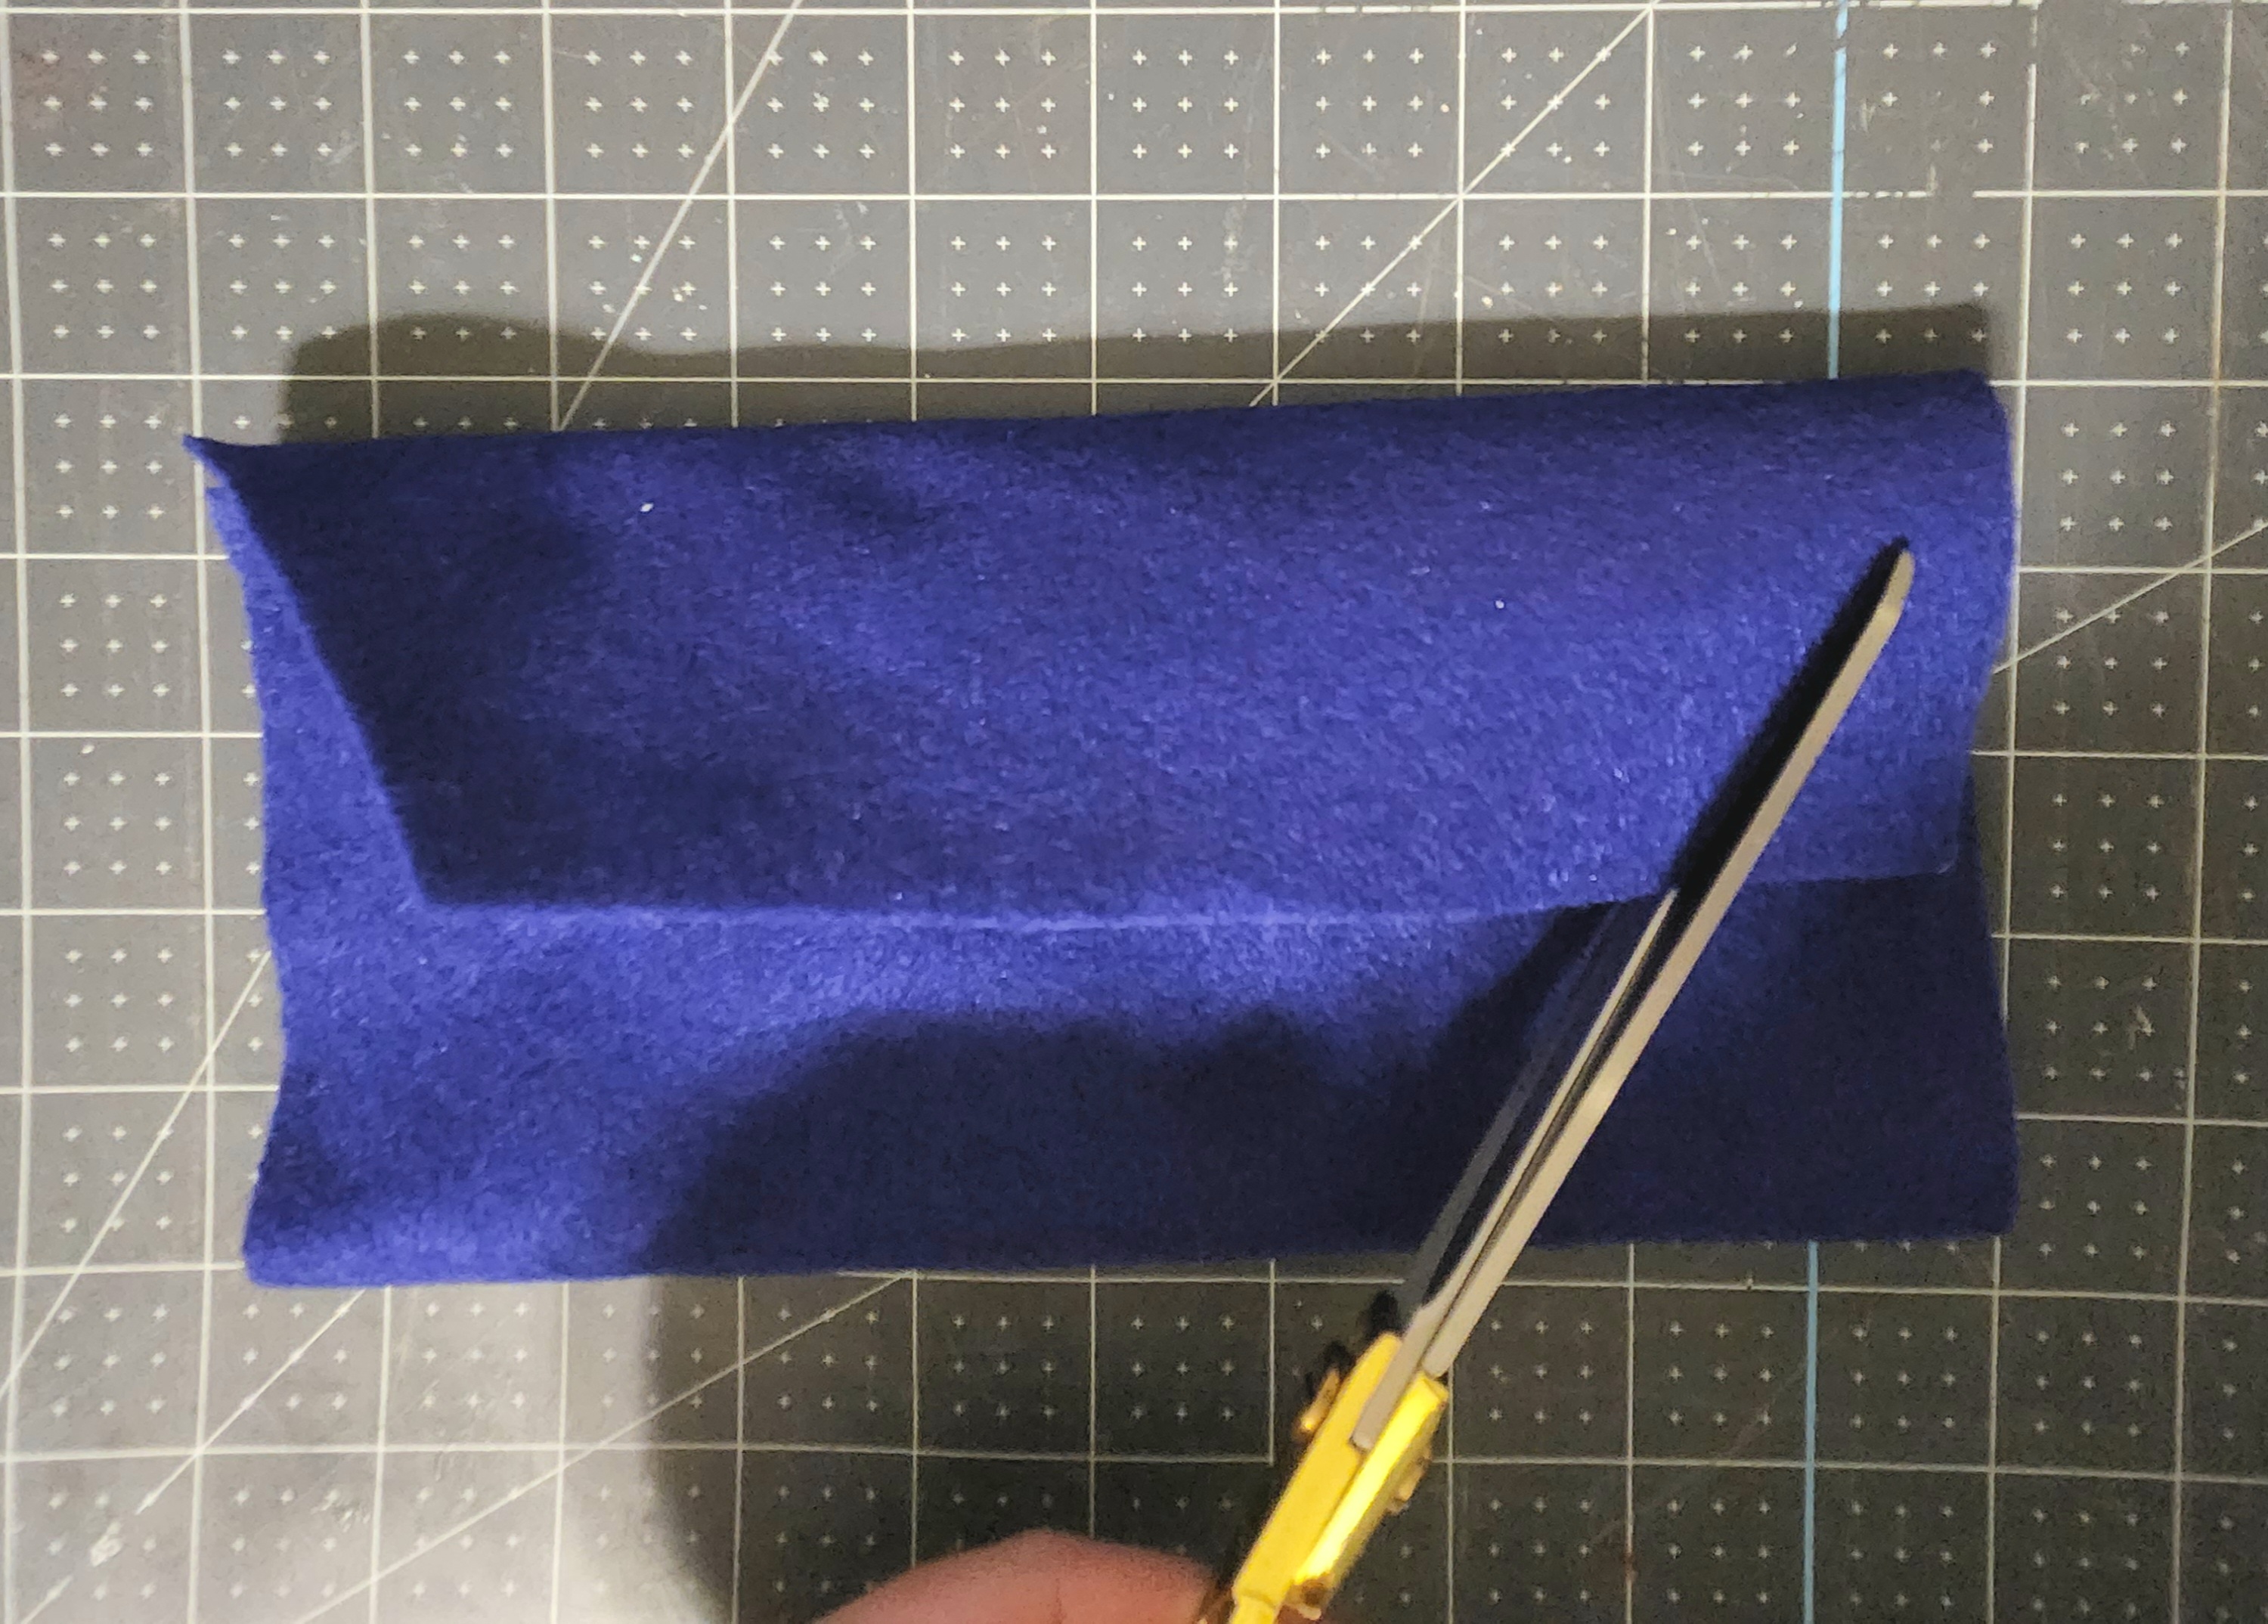 Cutting the top flap of felt into an envelope shape, diagonally from the bottom to the corner.